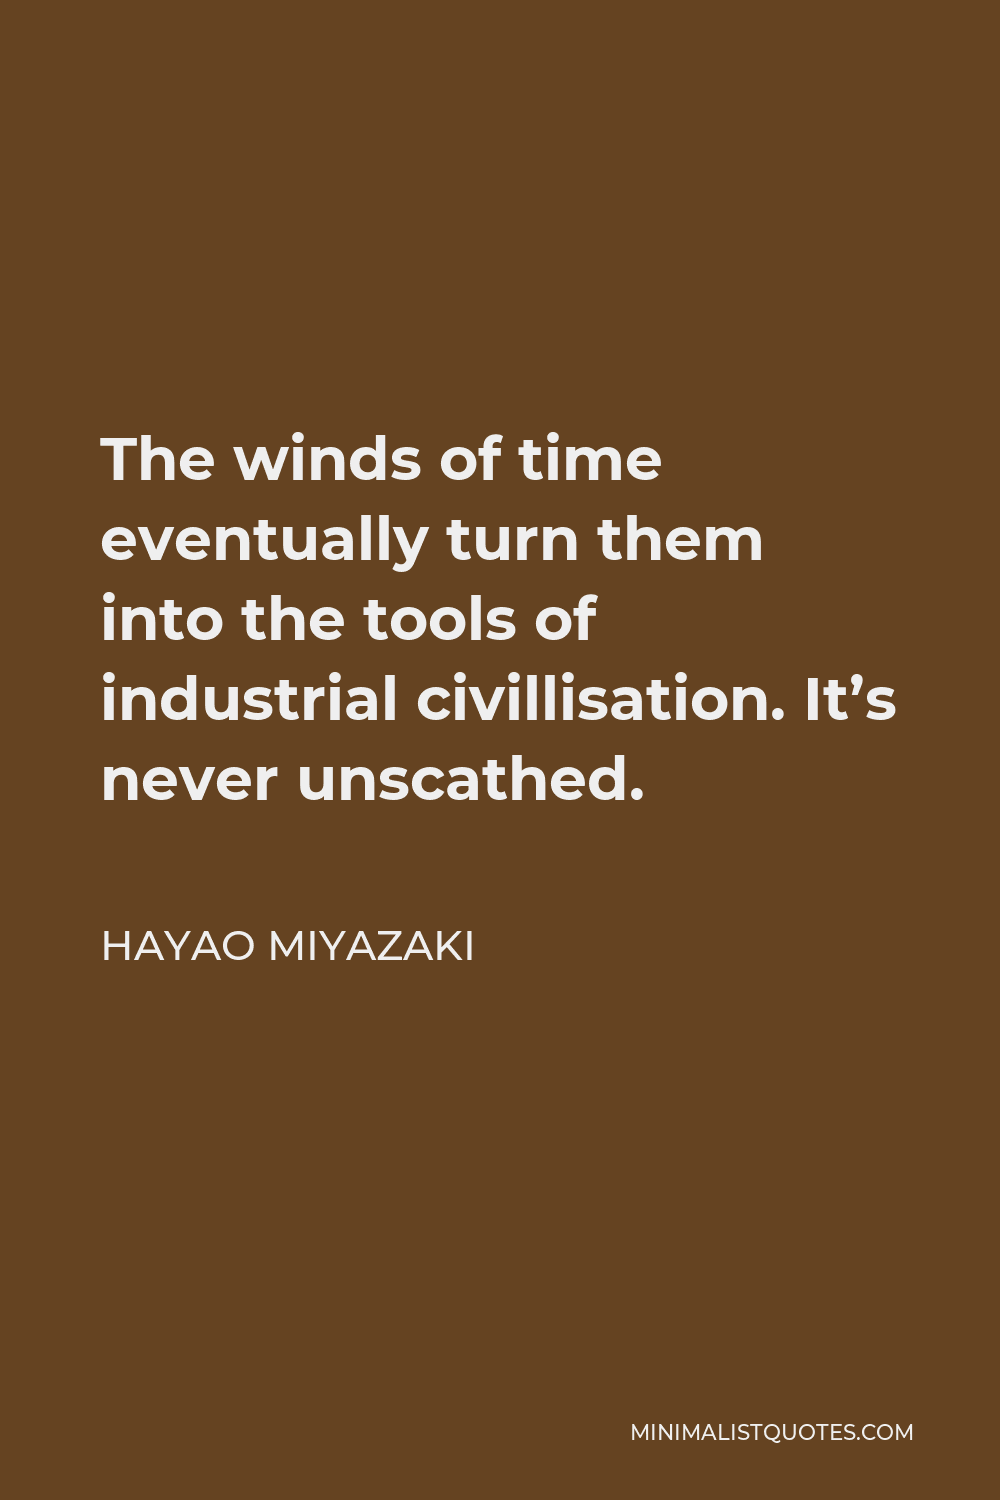 Hayao Miyazaki Quote - The winds of time eventually turn them into the tools of industrial civillisation. It’s never unscathed.